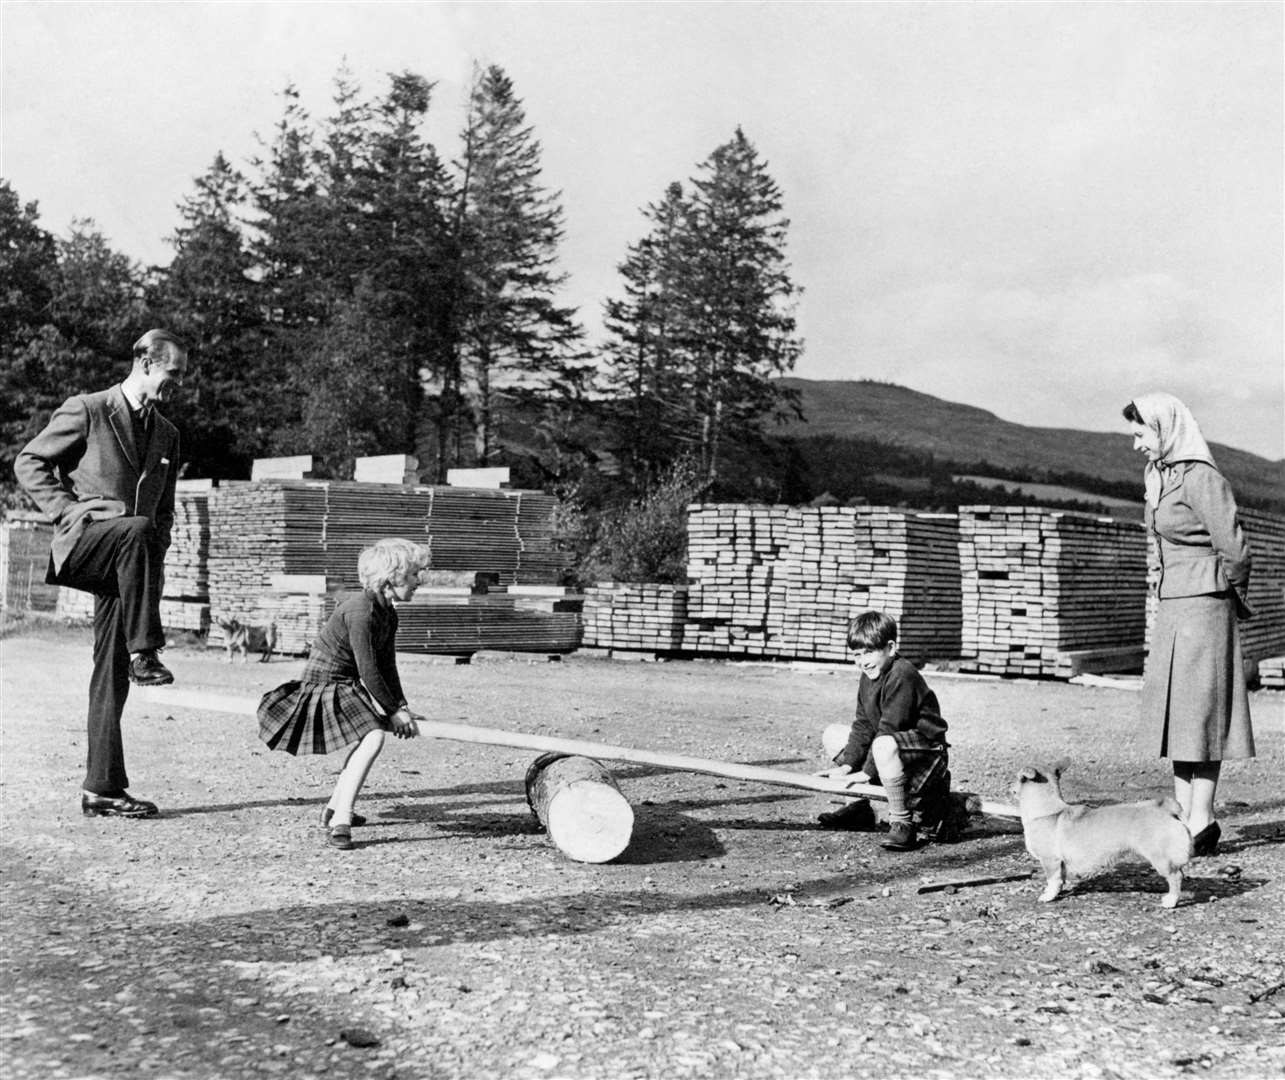 Charles and his sister Princess Anne, watched by their parents Elizabeth II and the Duke of Edinburgh, play on a see-saw at Balmoral in 1957 (PA)